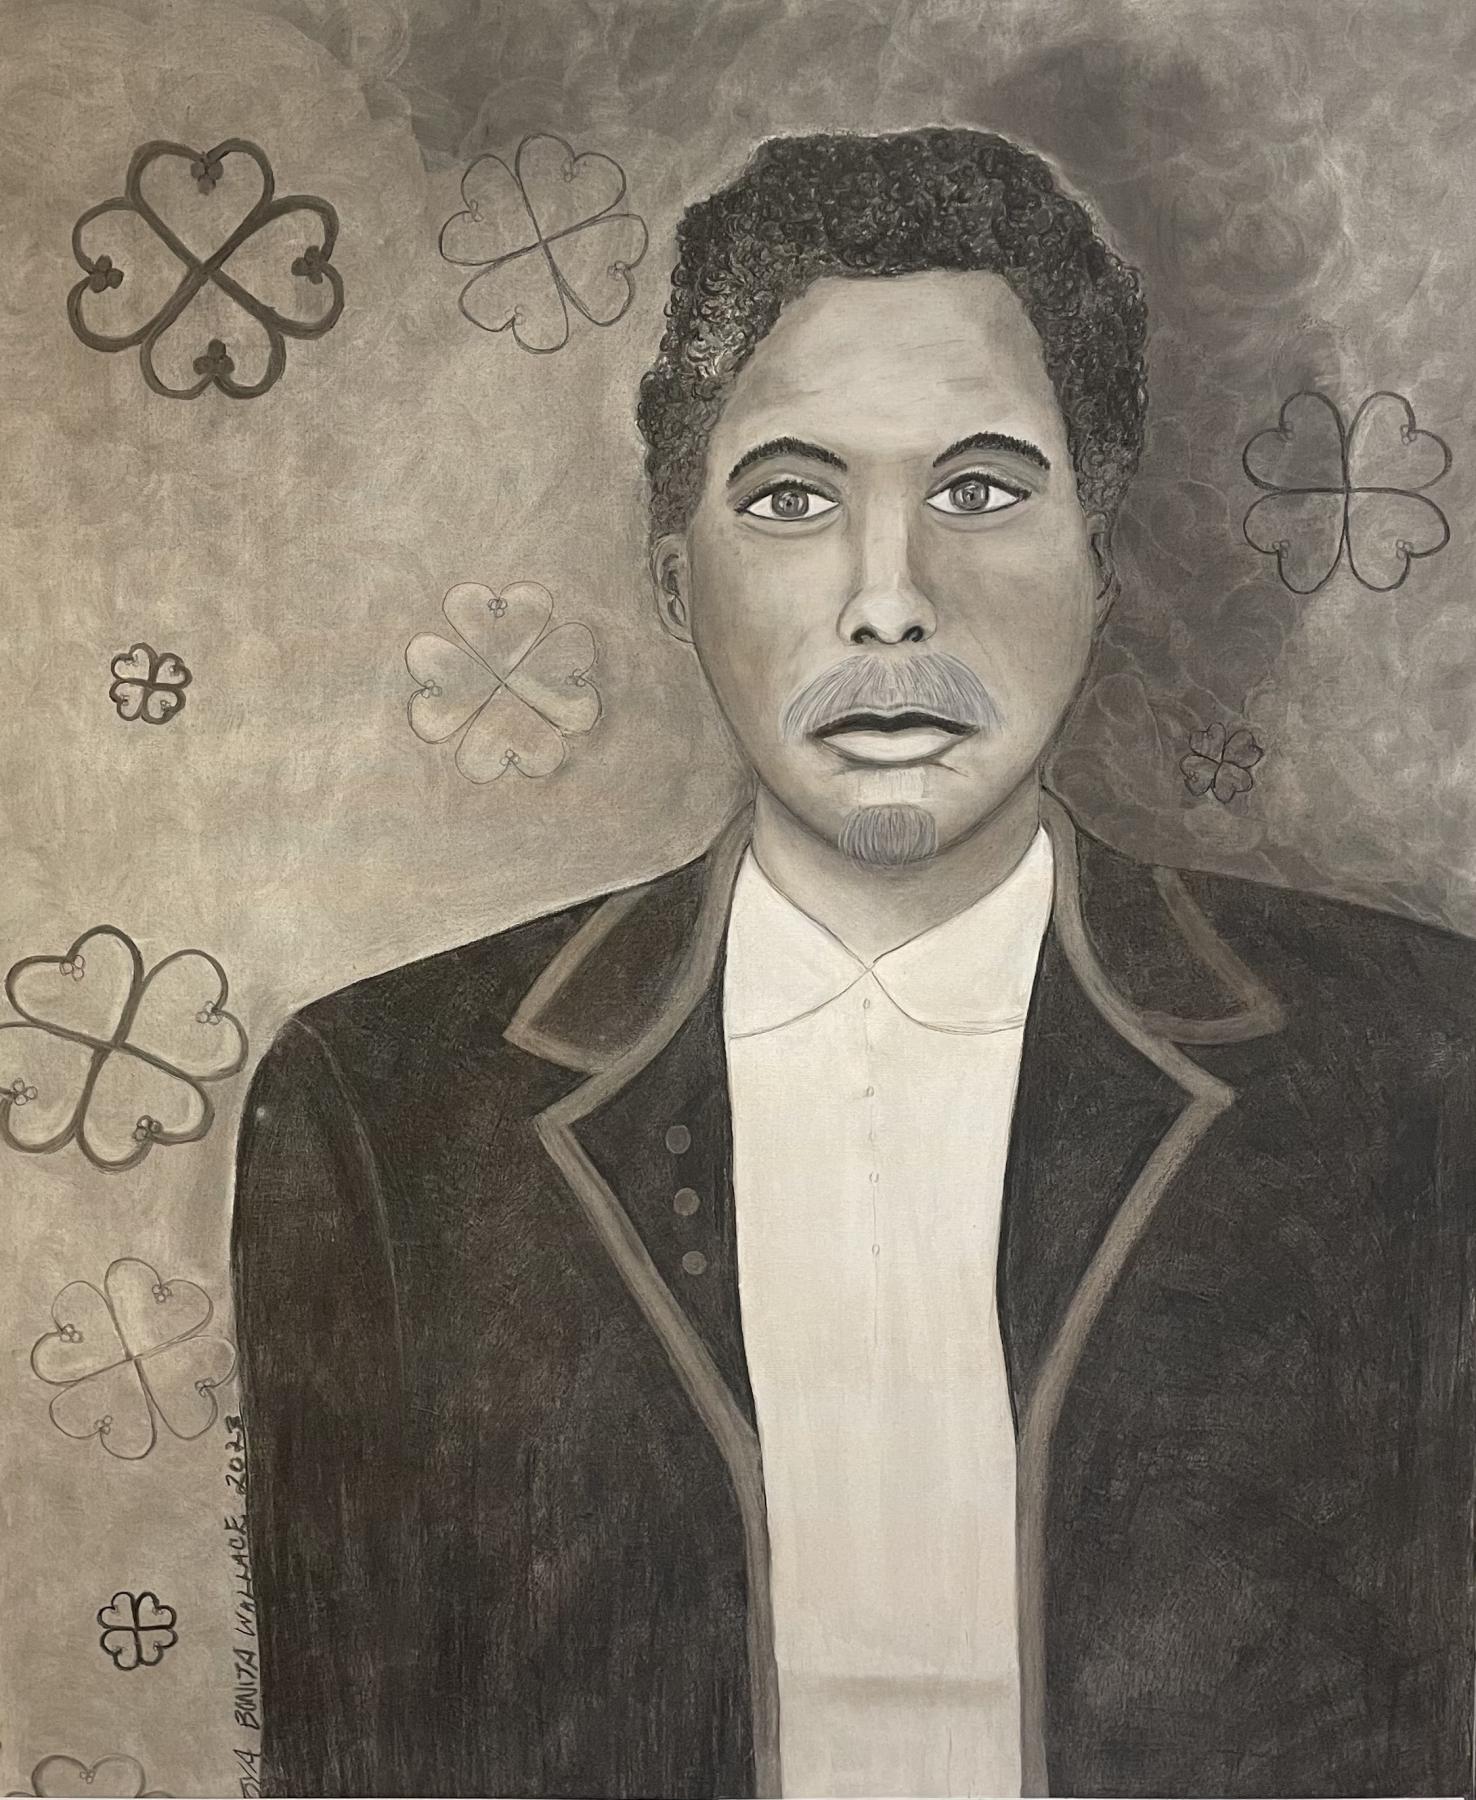 Charcoal drawing of The Honorable Samuel N. Nuckles, SC House of Representatives Member from 1868-1872 (My Great-Great-Great-Grandfather) by Toya Bonita Wallace.  